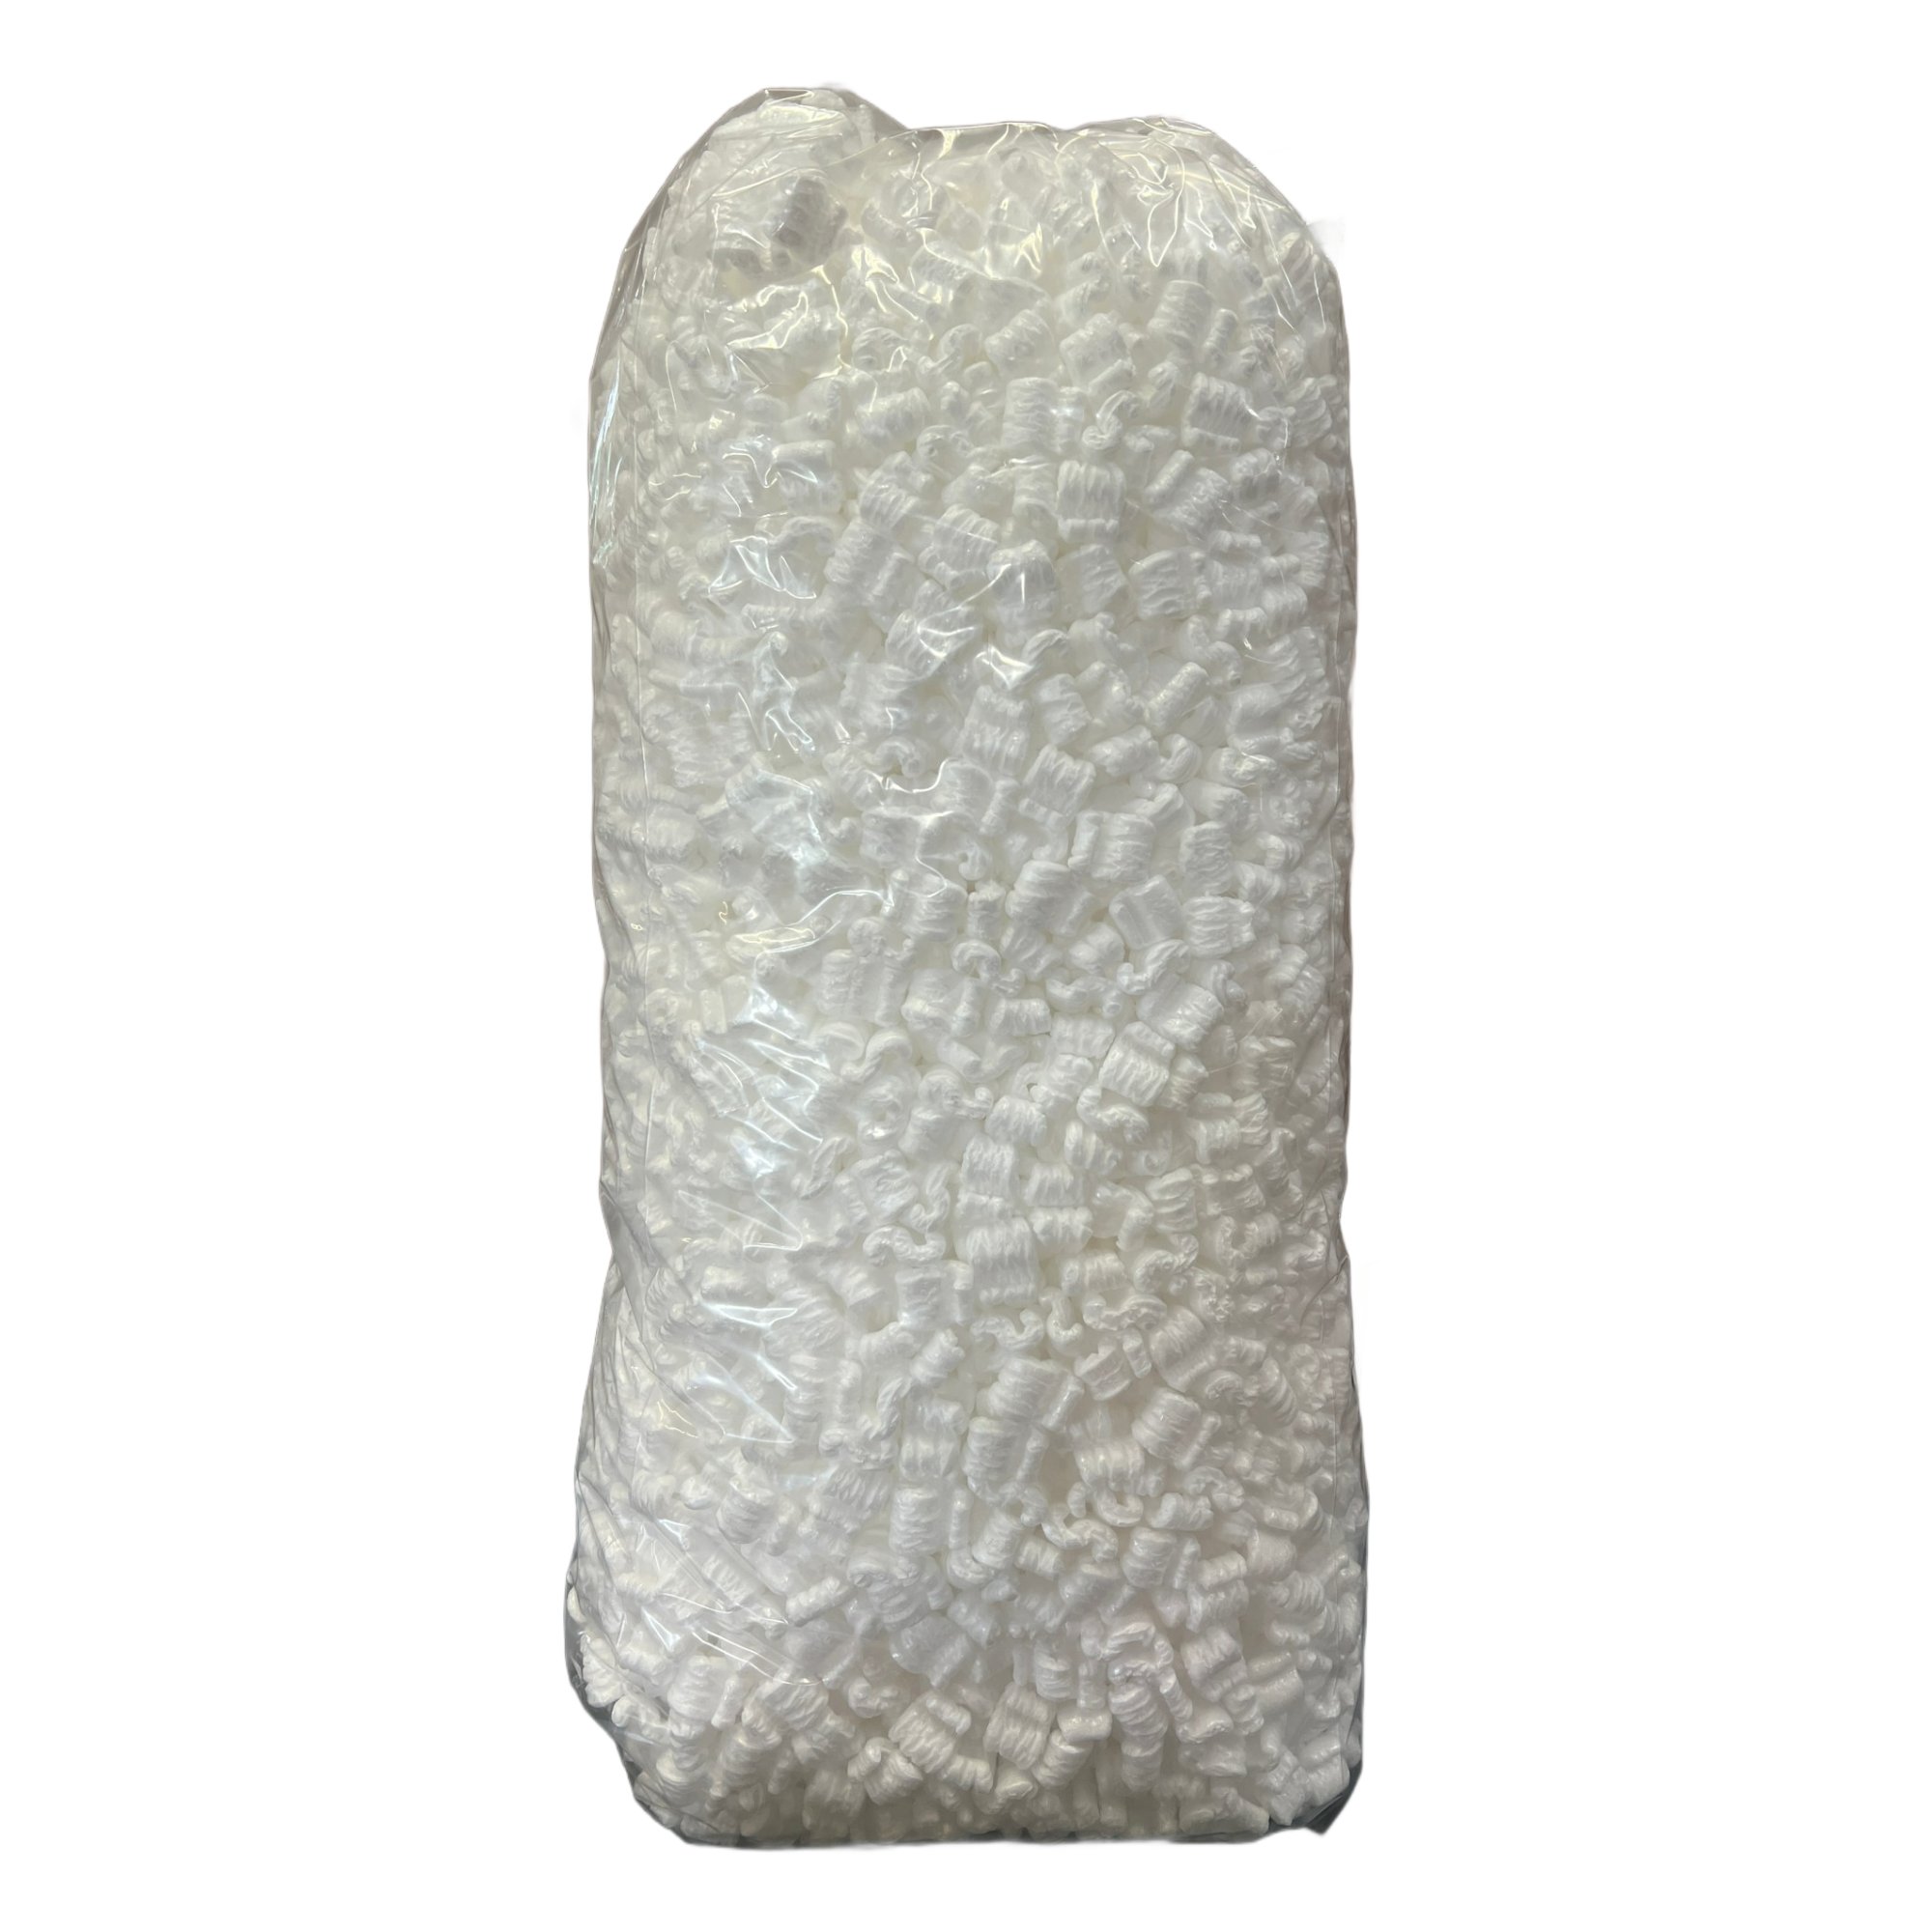 Packing Peanuts Shipping Anti Static Loose Fill 60 Gallons 8 Cubic Feet White